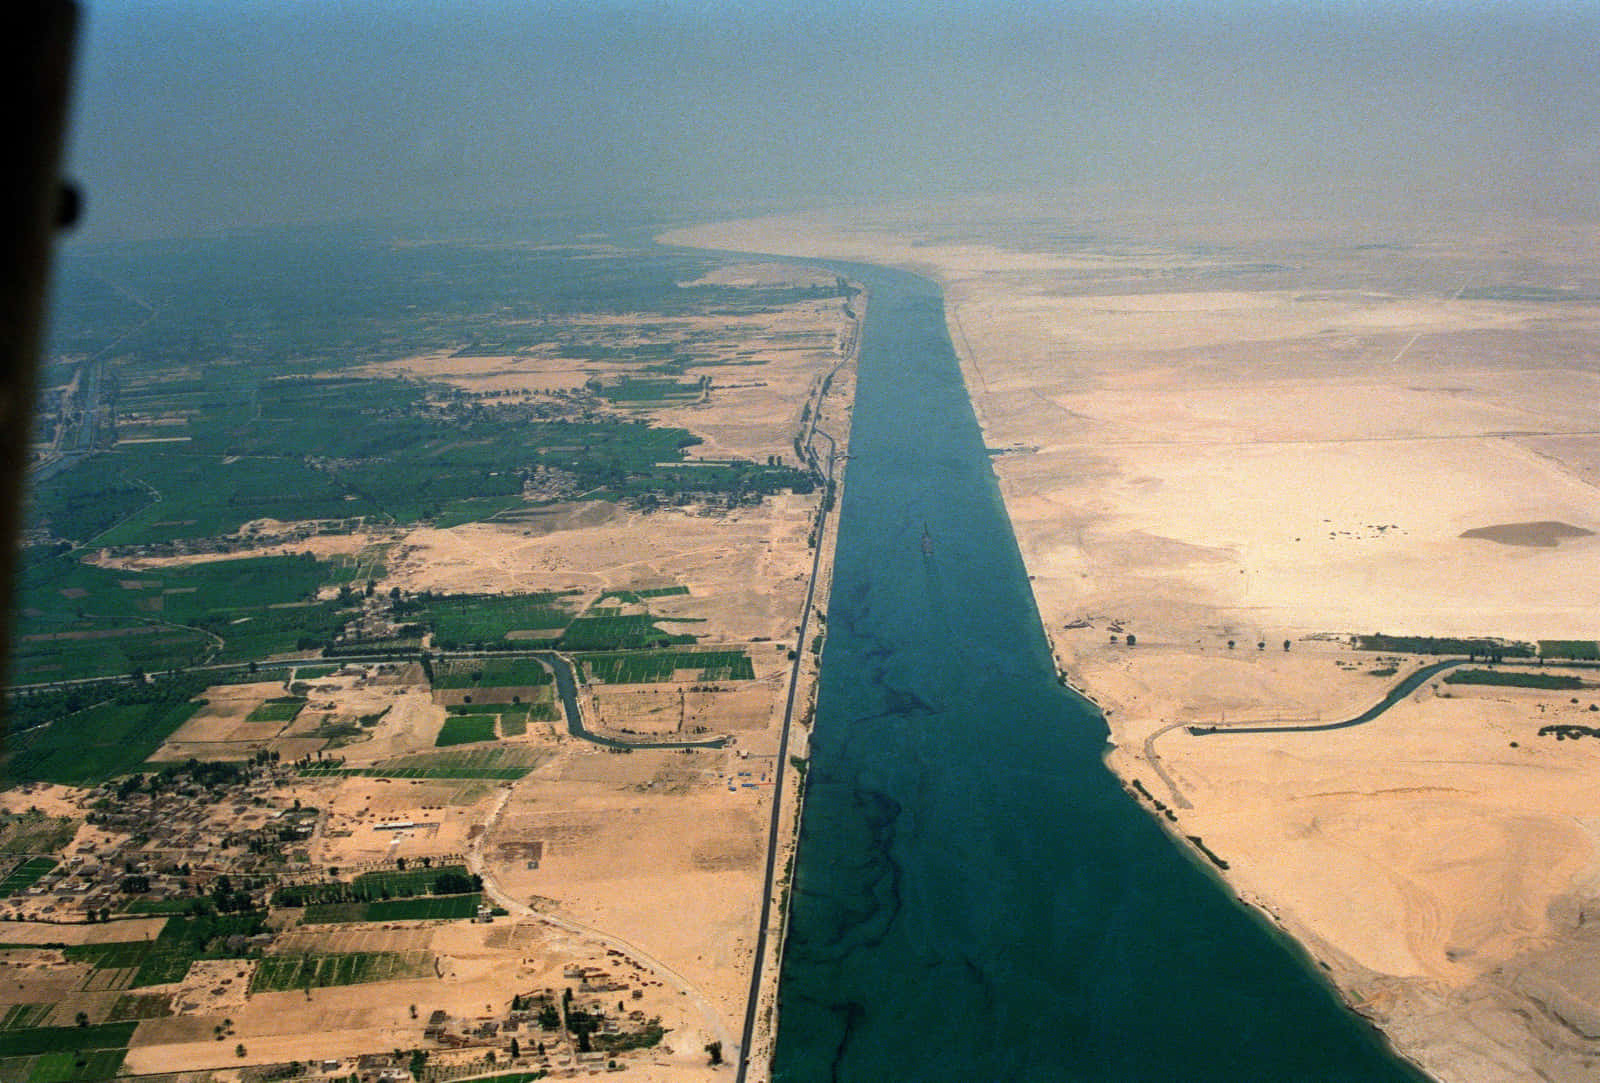 A River In The Desert